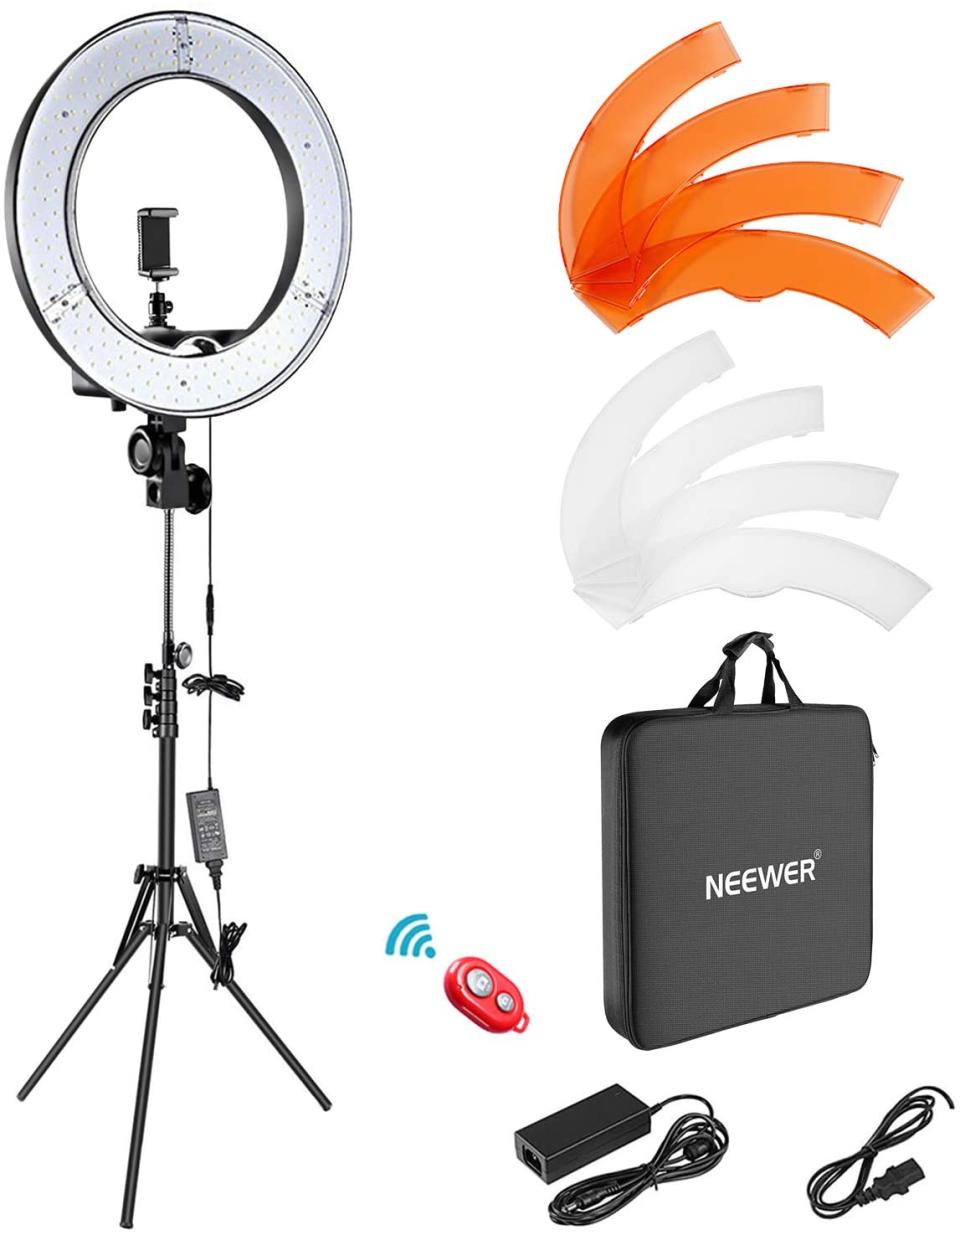 Neewer Dimmable LED Ring Light, best ring light overall